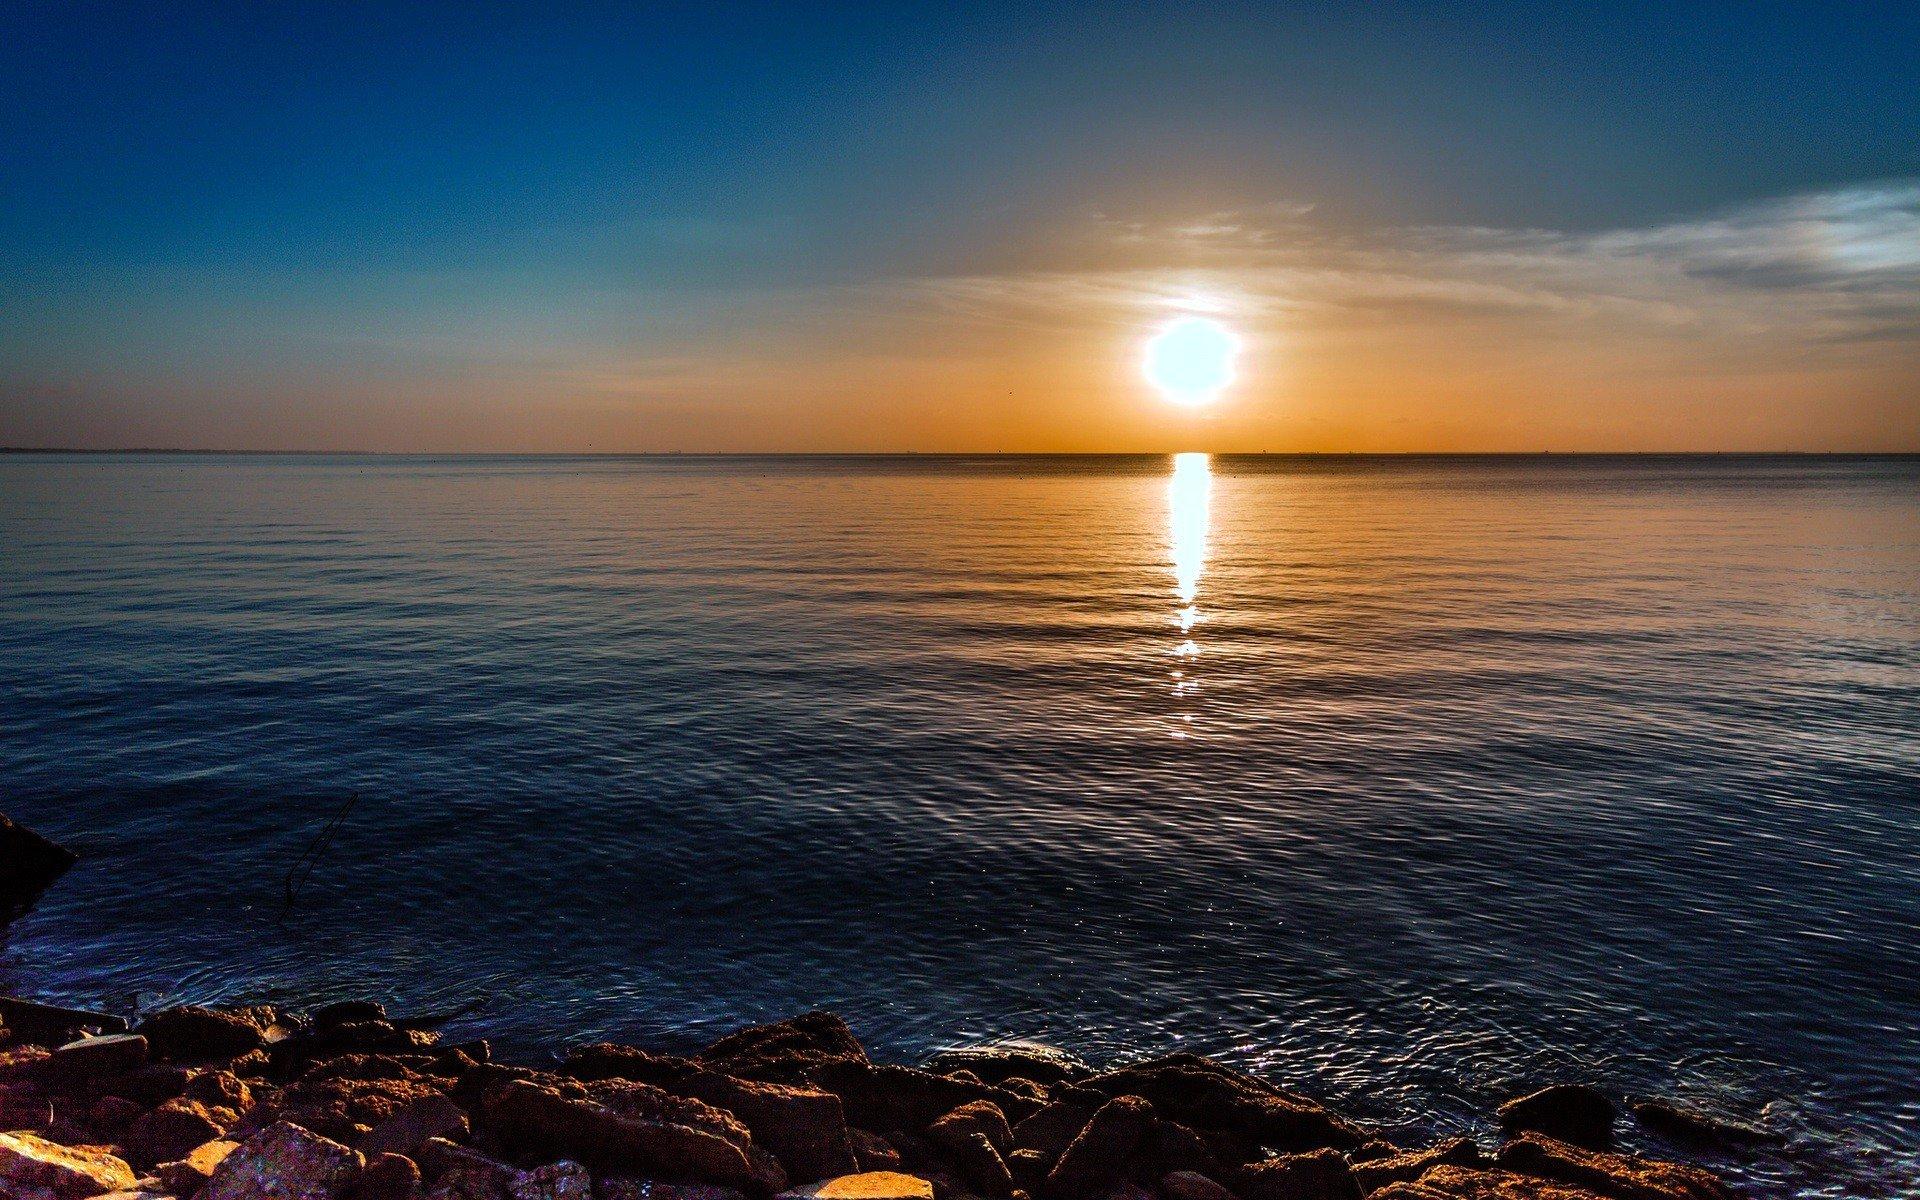 Water sunrise ocean nature rocks HDR photography sea clear sky